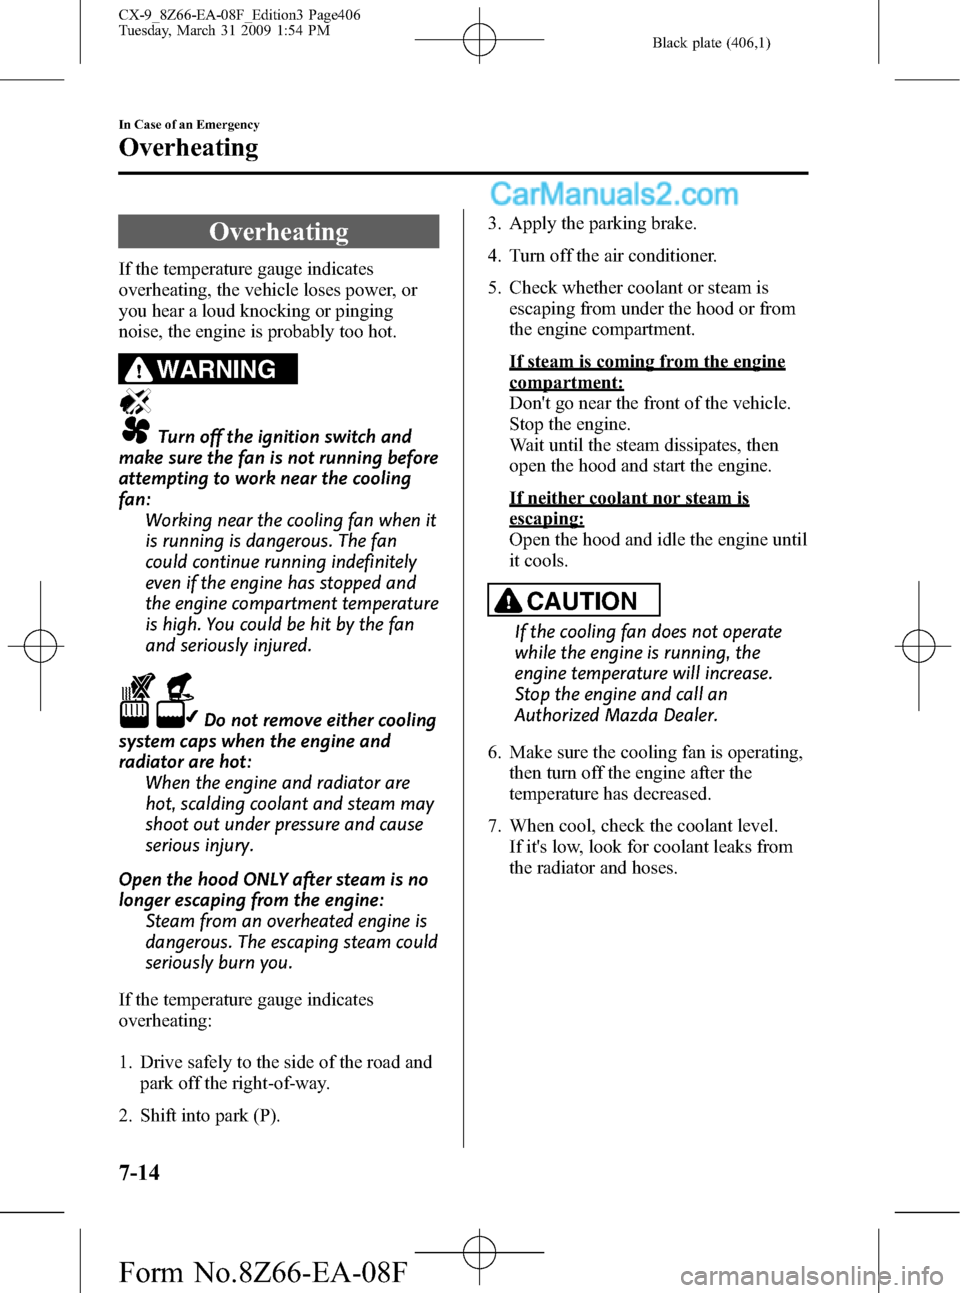 MAZDA MODEL CX-9 2009  Owners Manual (in English) Black plate (406,1)
Overheating
If the temperature gauge indicates
overheating, the vehicle loses power, or
you hear a loud knocking or pinging
noise, the engine is probably too hot.
WARNING
Turn off 